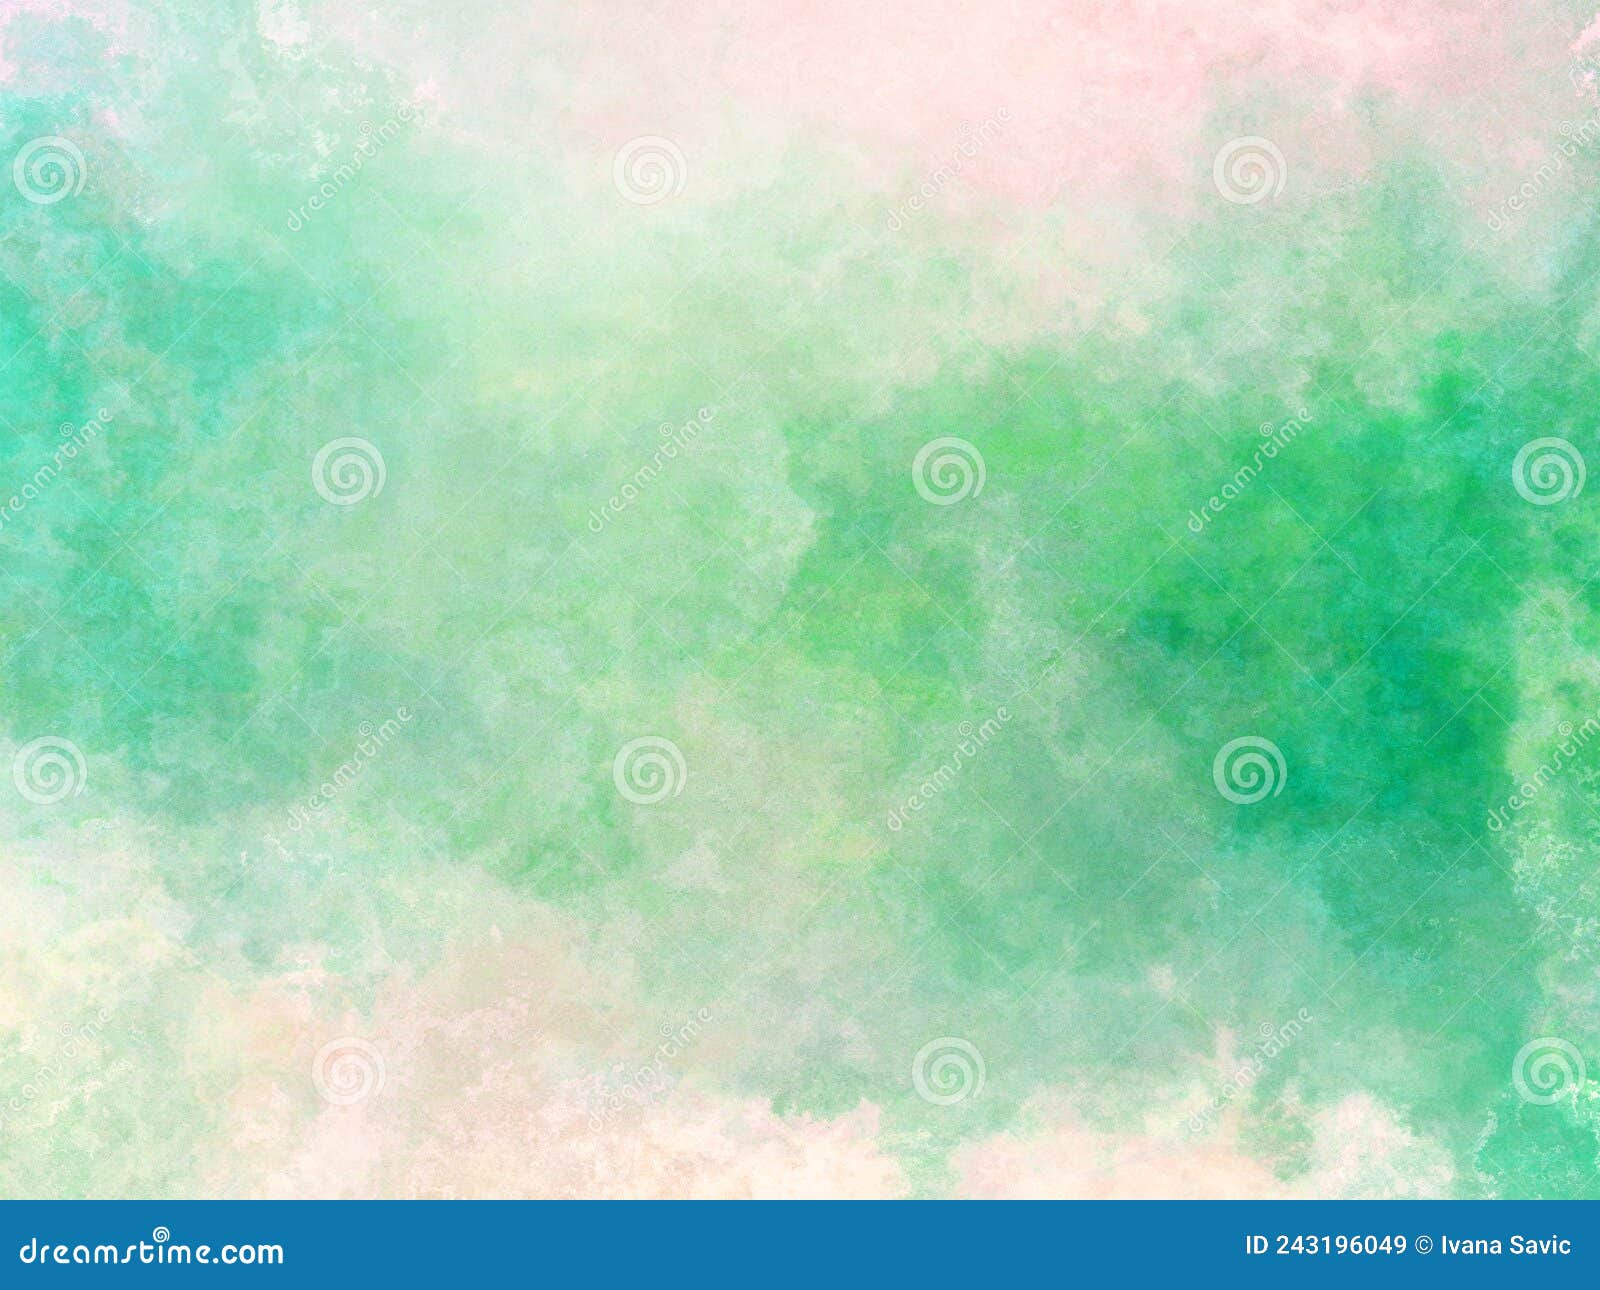 Watercolor Background in Green and White Painting with Gradient Painted ...